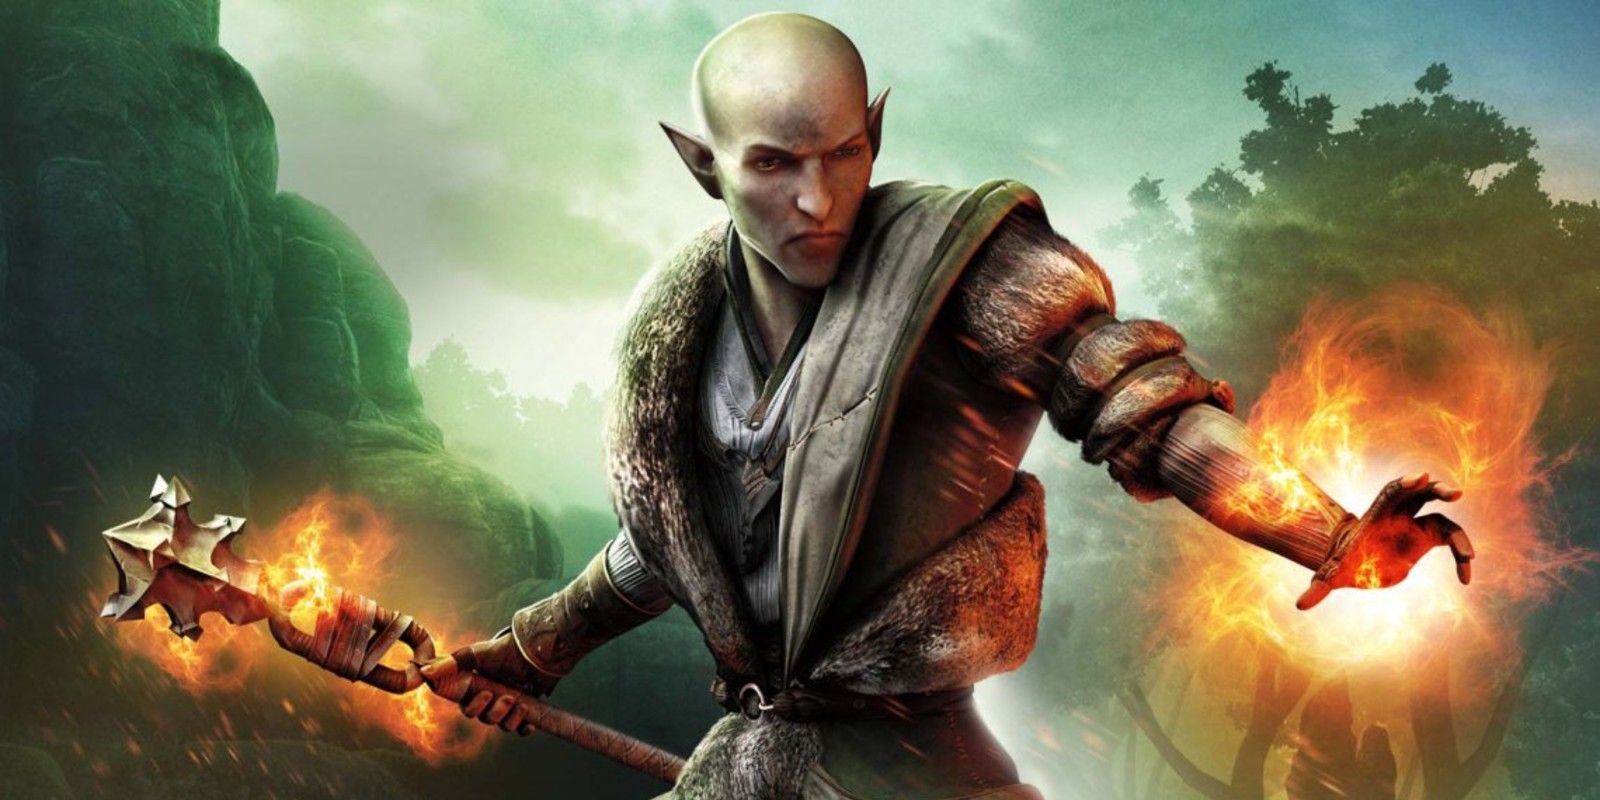 Solas is a Rift Mage in Dragon Age: Inquisition